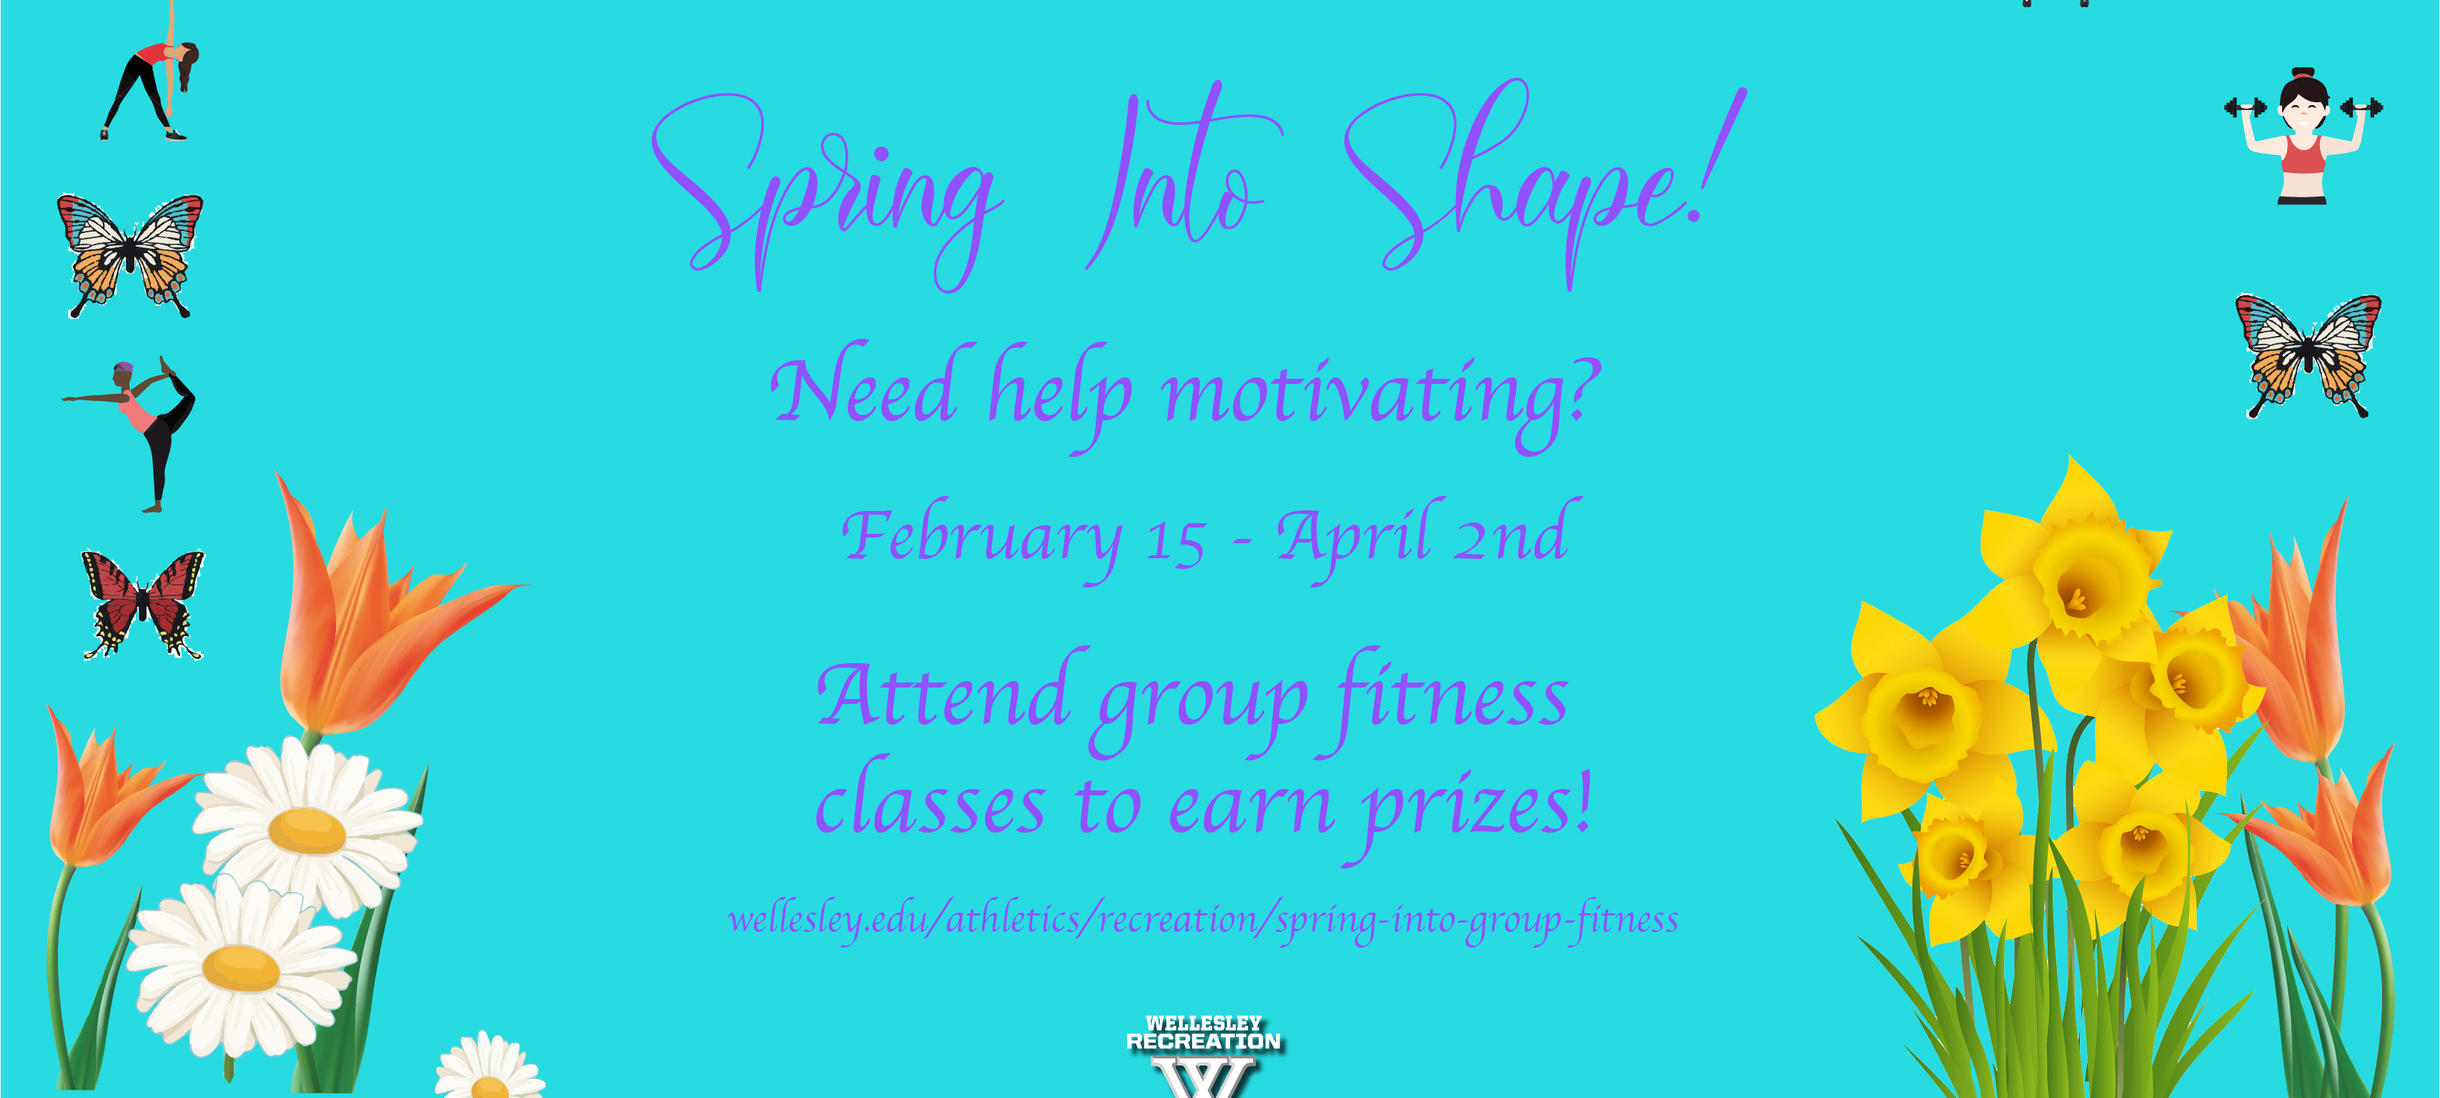 Spring Into Group Fitness